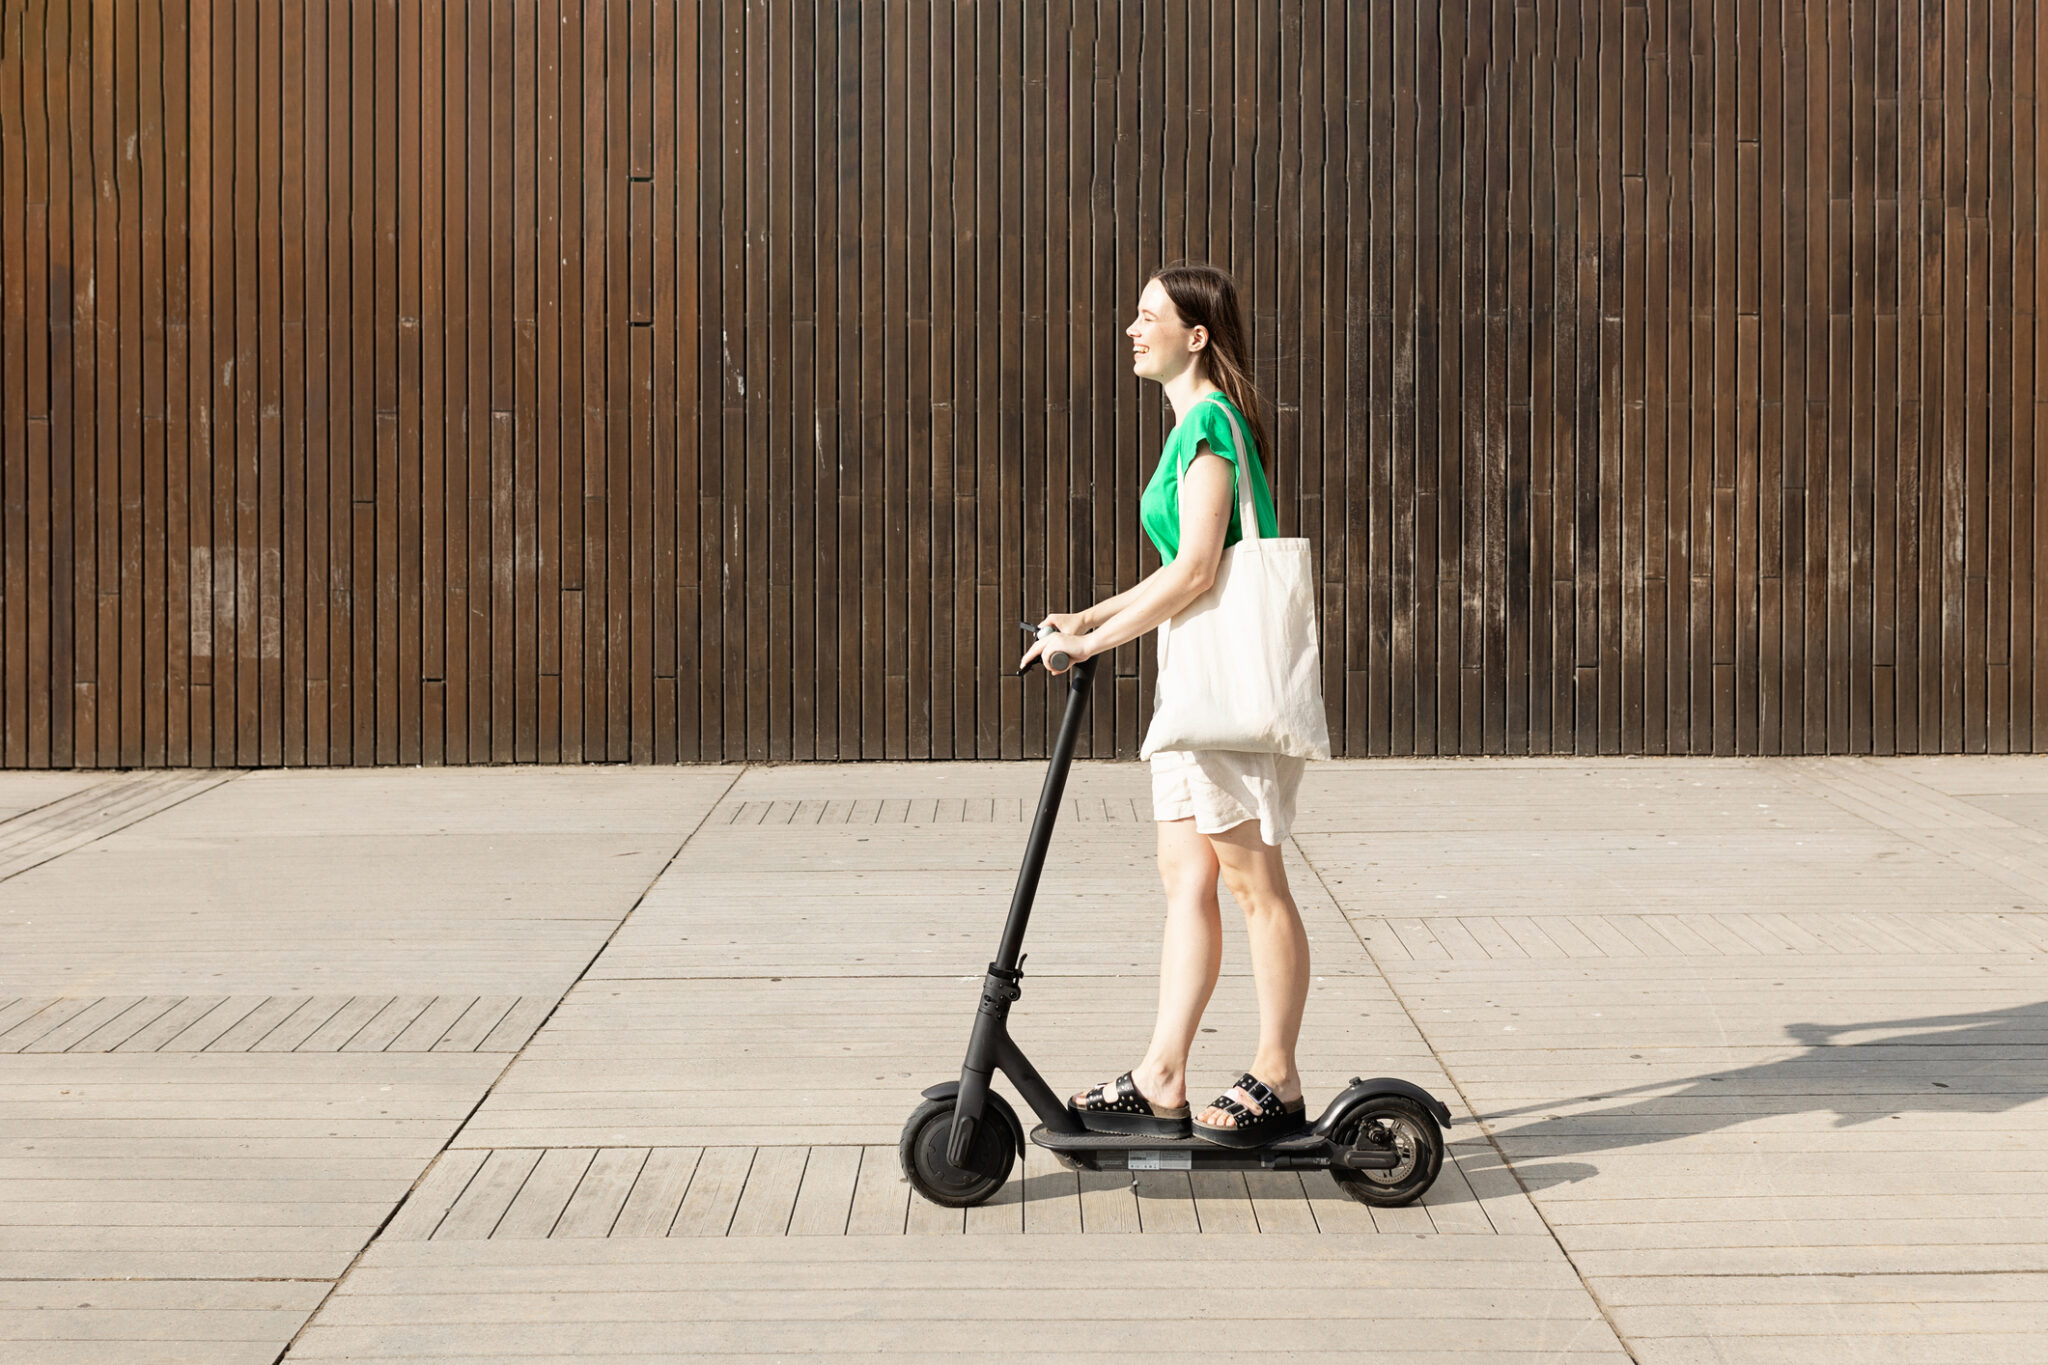 Smiling young woman riding an electric scooter outdoors. Eco-friendly transport and urban lifestyle concept.